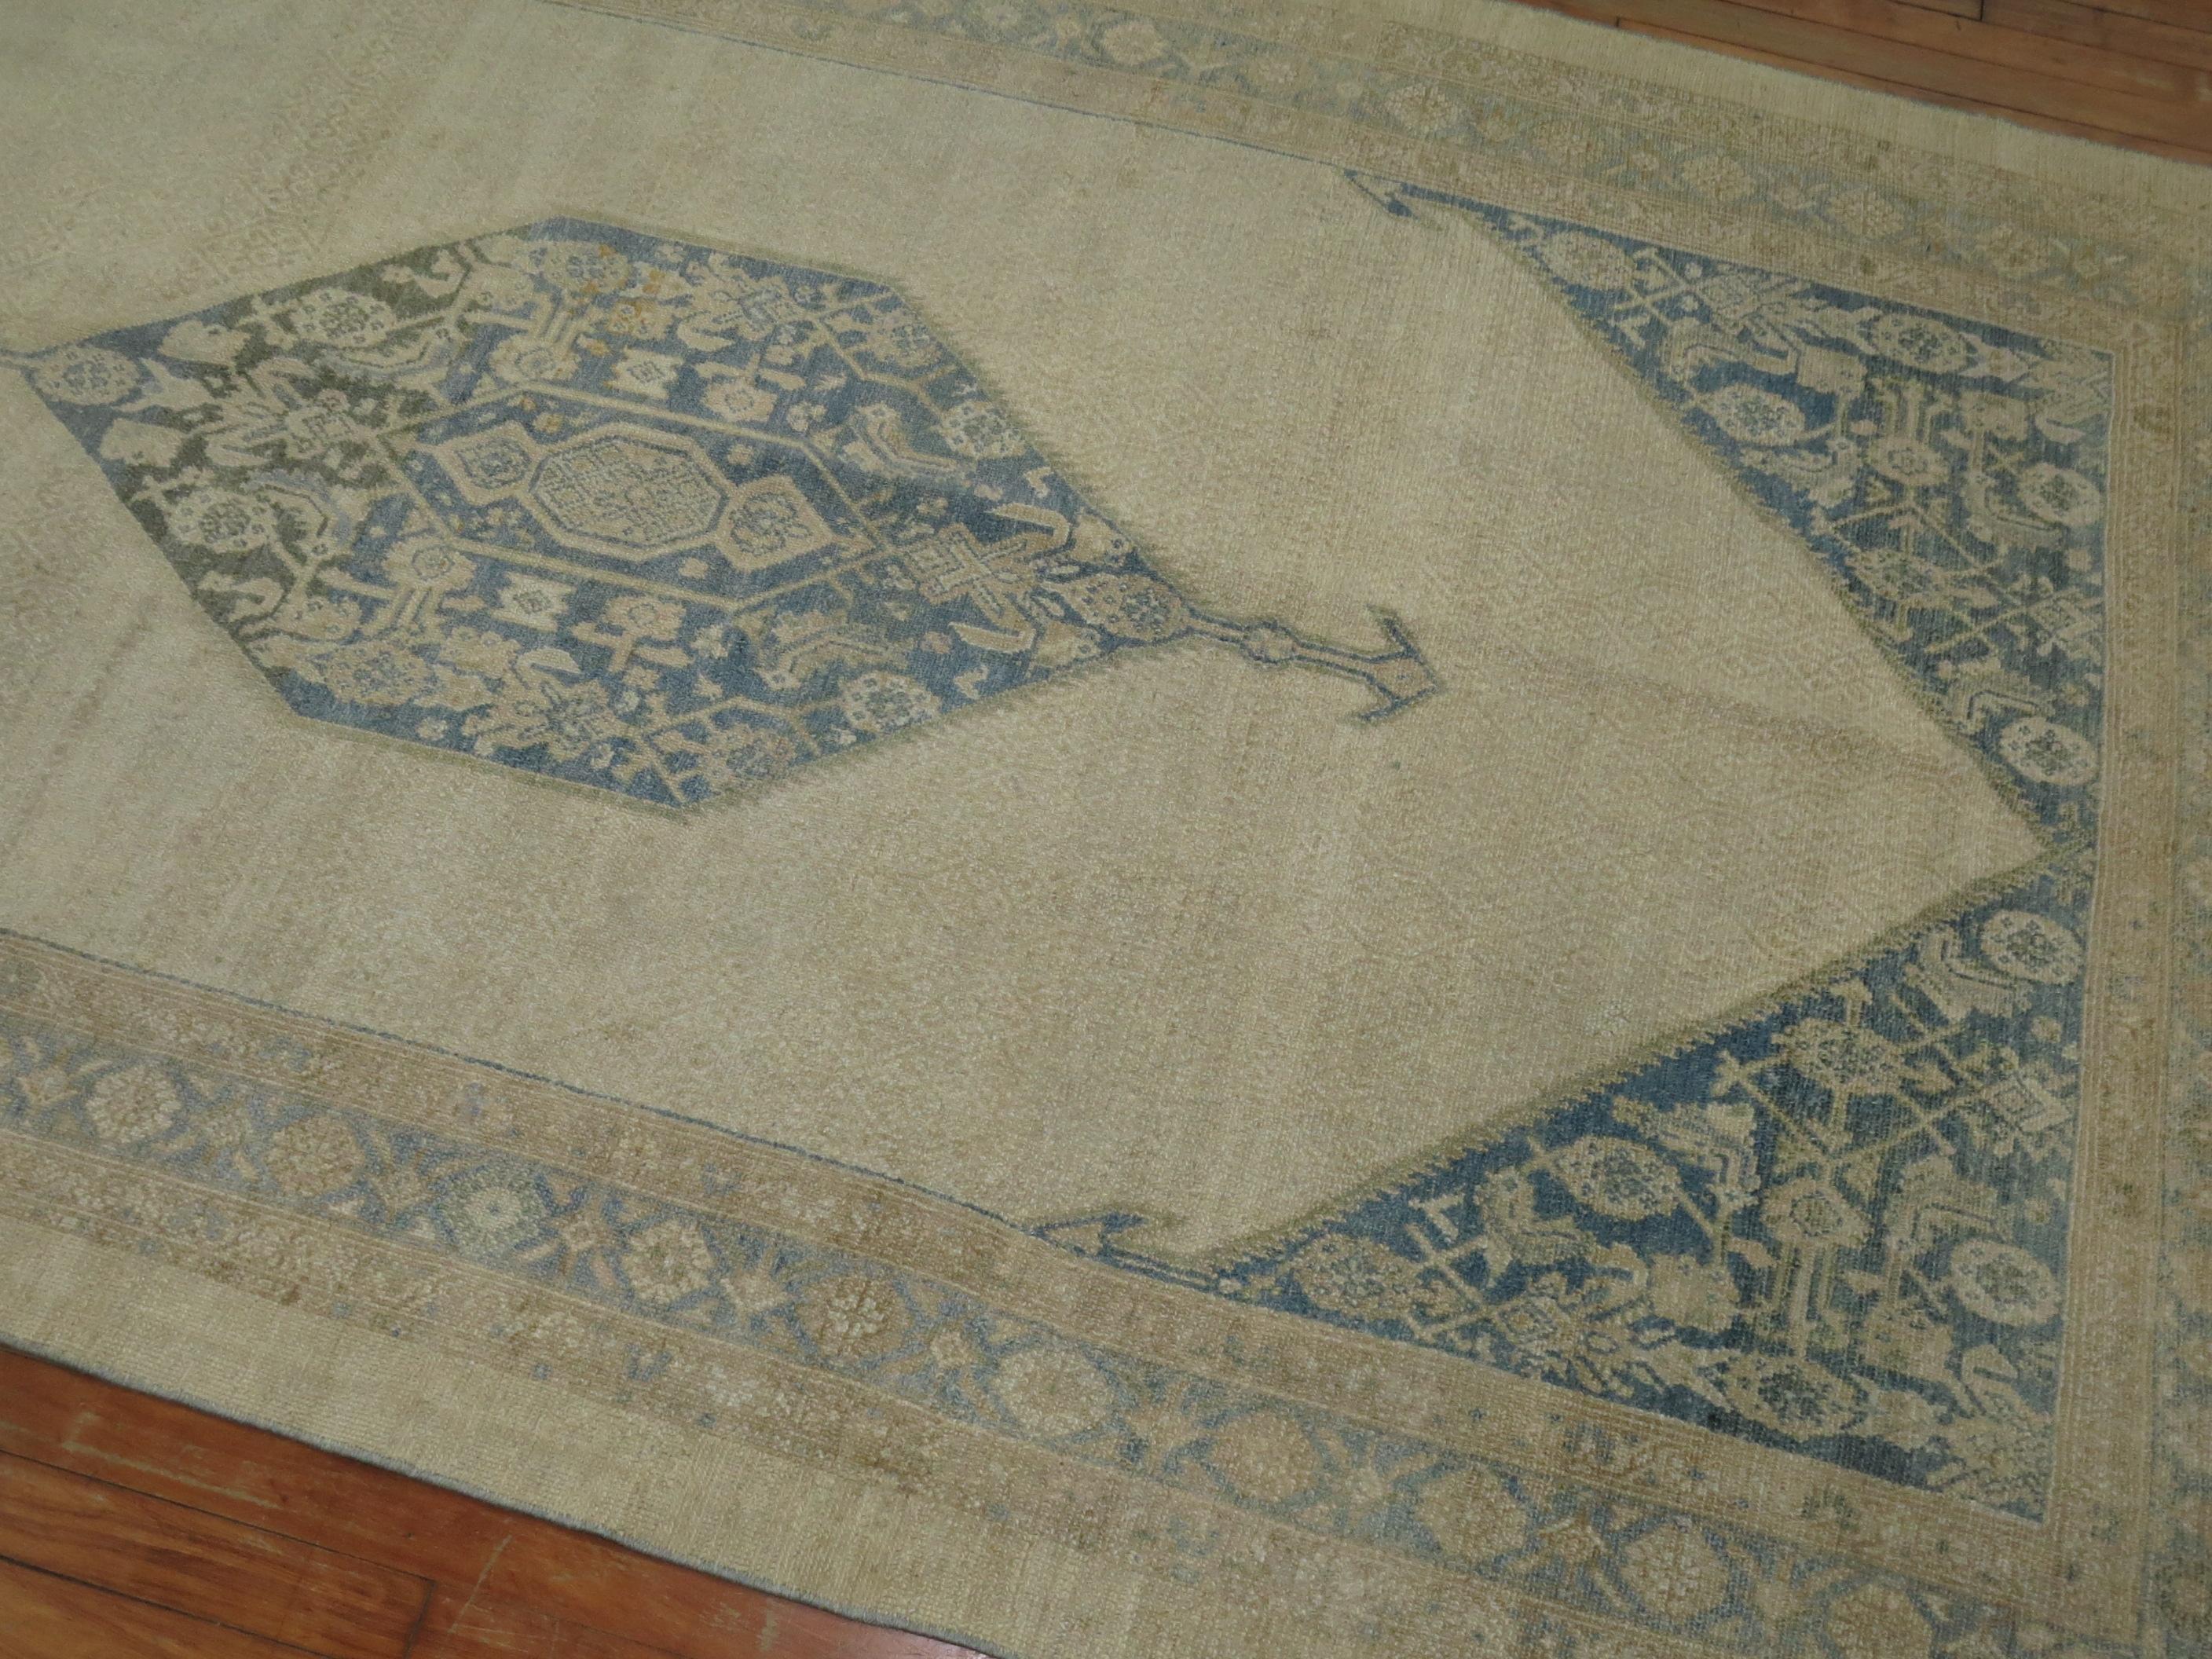 An authentic early 20th century Persian Serab gallery rug with a large soft blue central medallion set on a khaki field.

Measures: 5'1